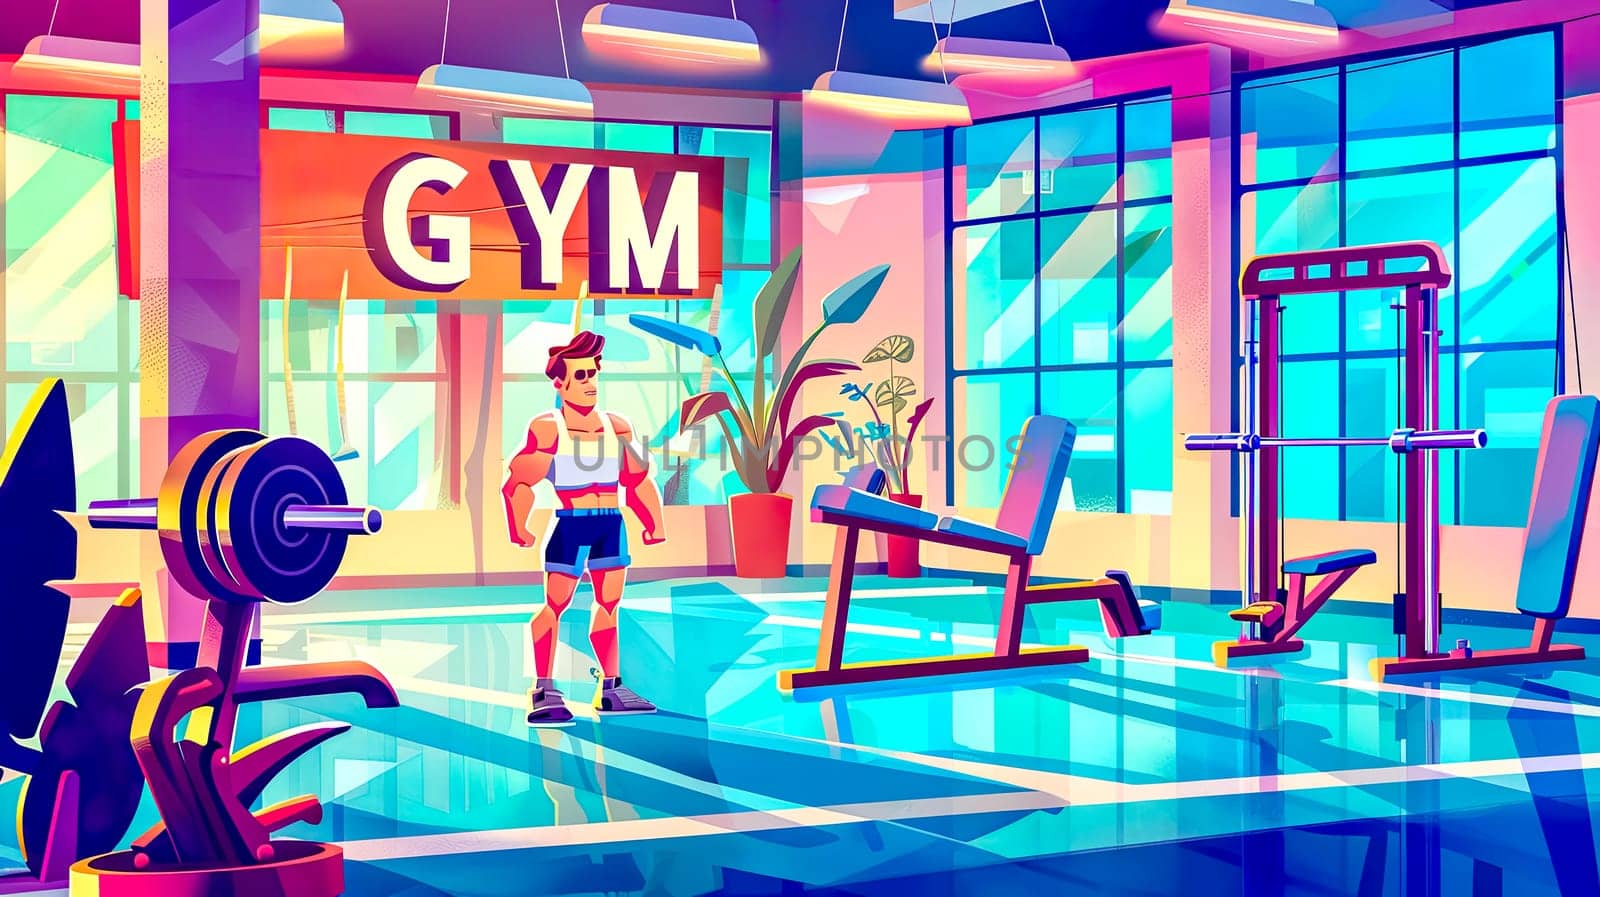 man exercising in colorful gym interior by Edophoto